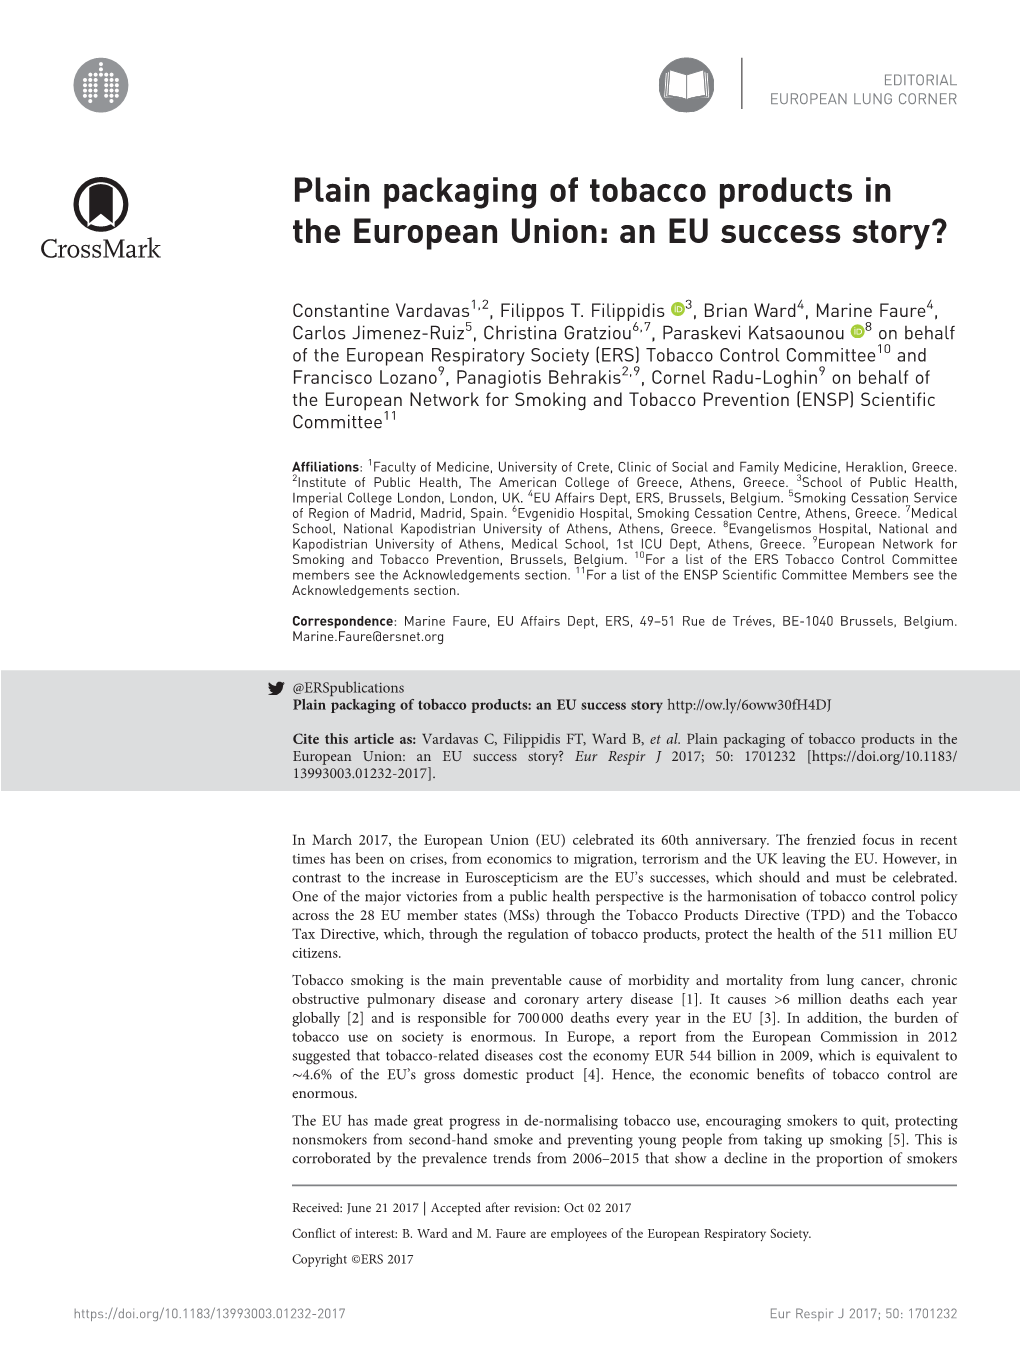 Plain Packaging of Tobacco Products in the European Union: an EU Success Story? Eur Respir J 2017; 50: 1701232 [ 13993003.01232-2017]